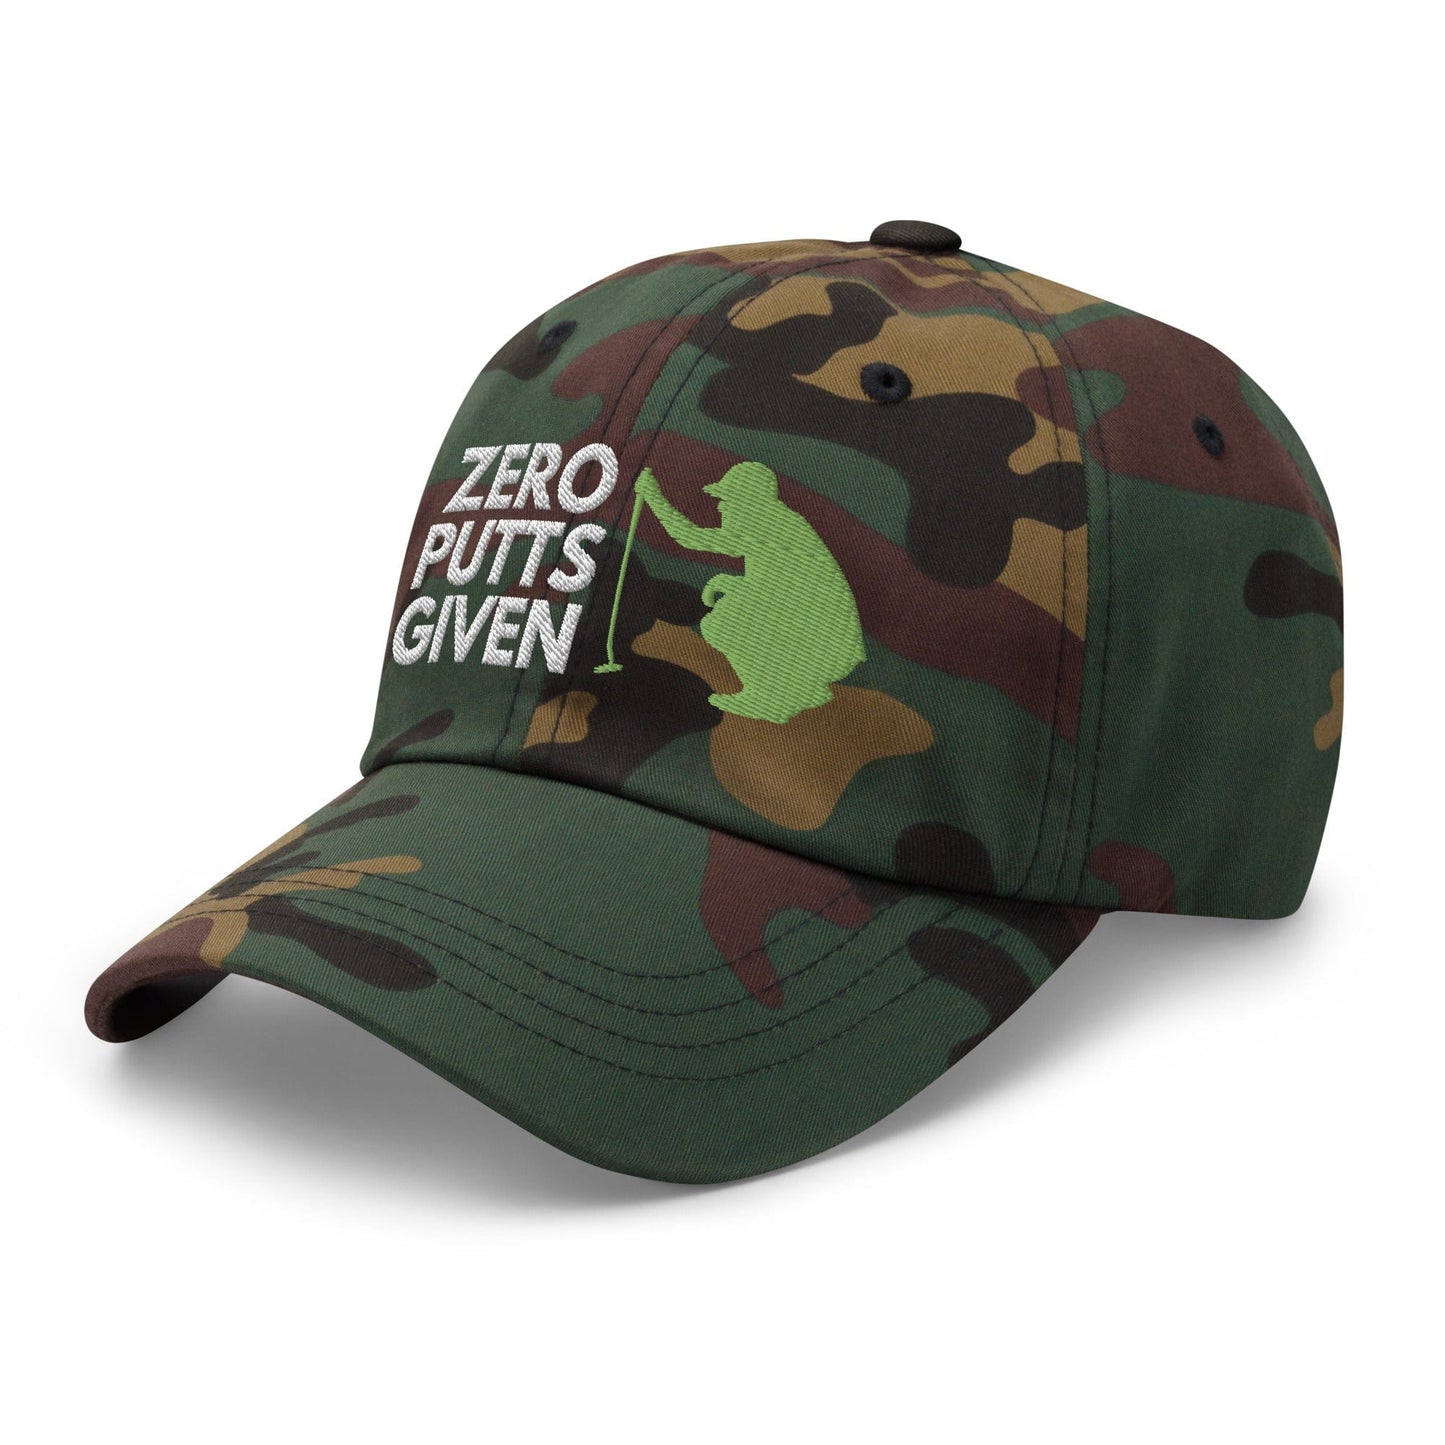 Funny Golfer Gifts  Dad Cap Zero Putts Given Hat Cap